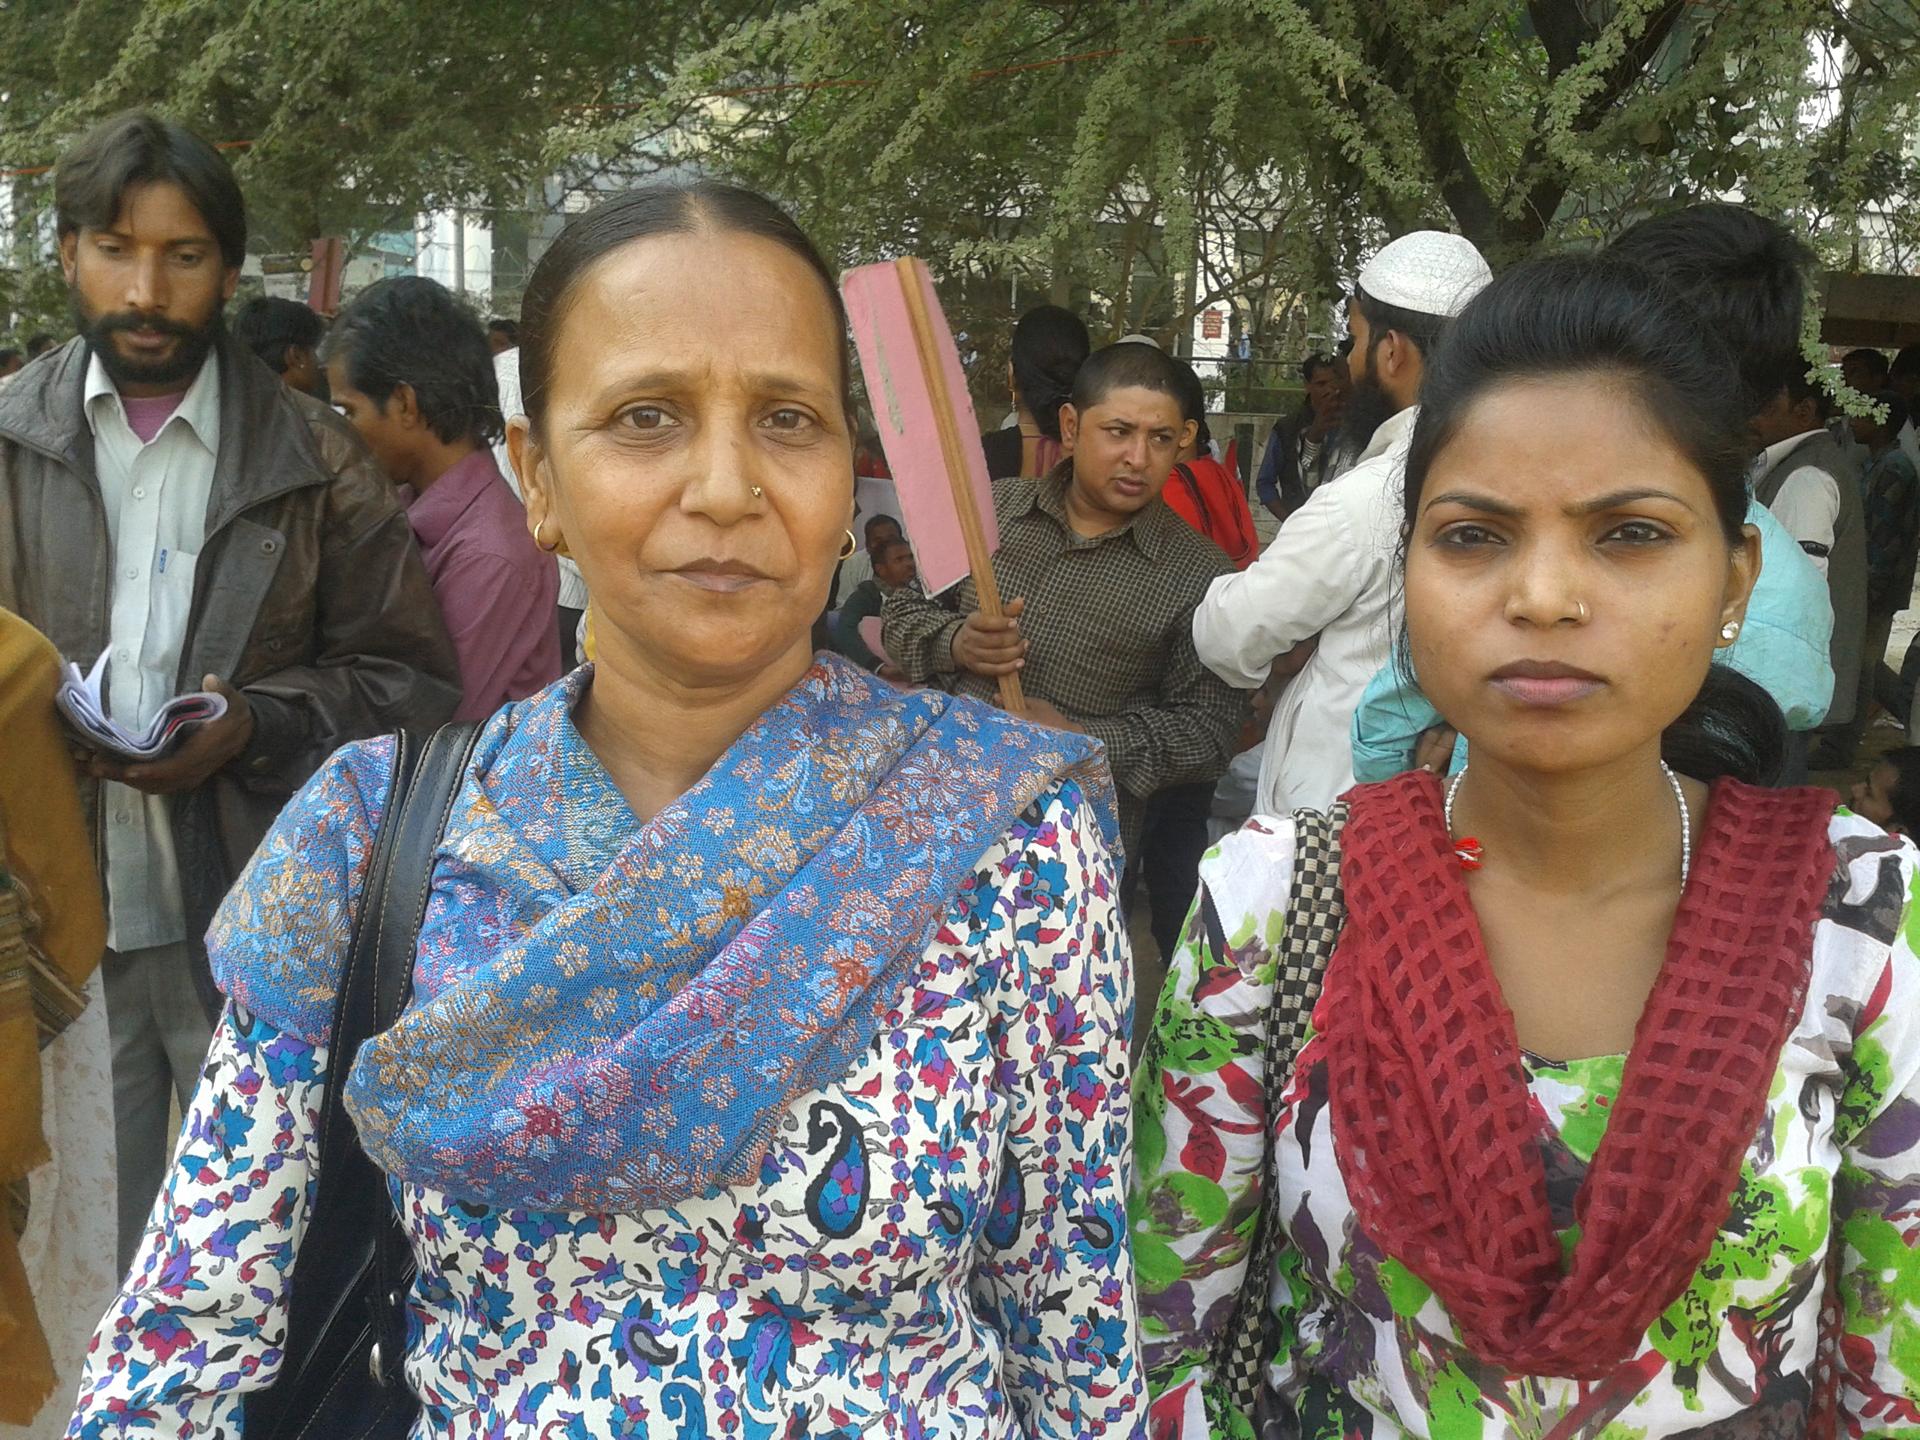 Sudha, a 42 year-old widow (left) has been selling purses at a market in West Delhi. Lately, she says her business has suffered as more and more people are choosing to shop at bigger stores in malls.